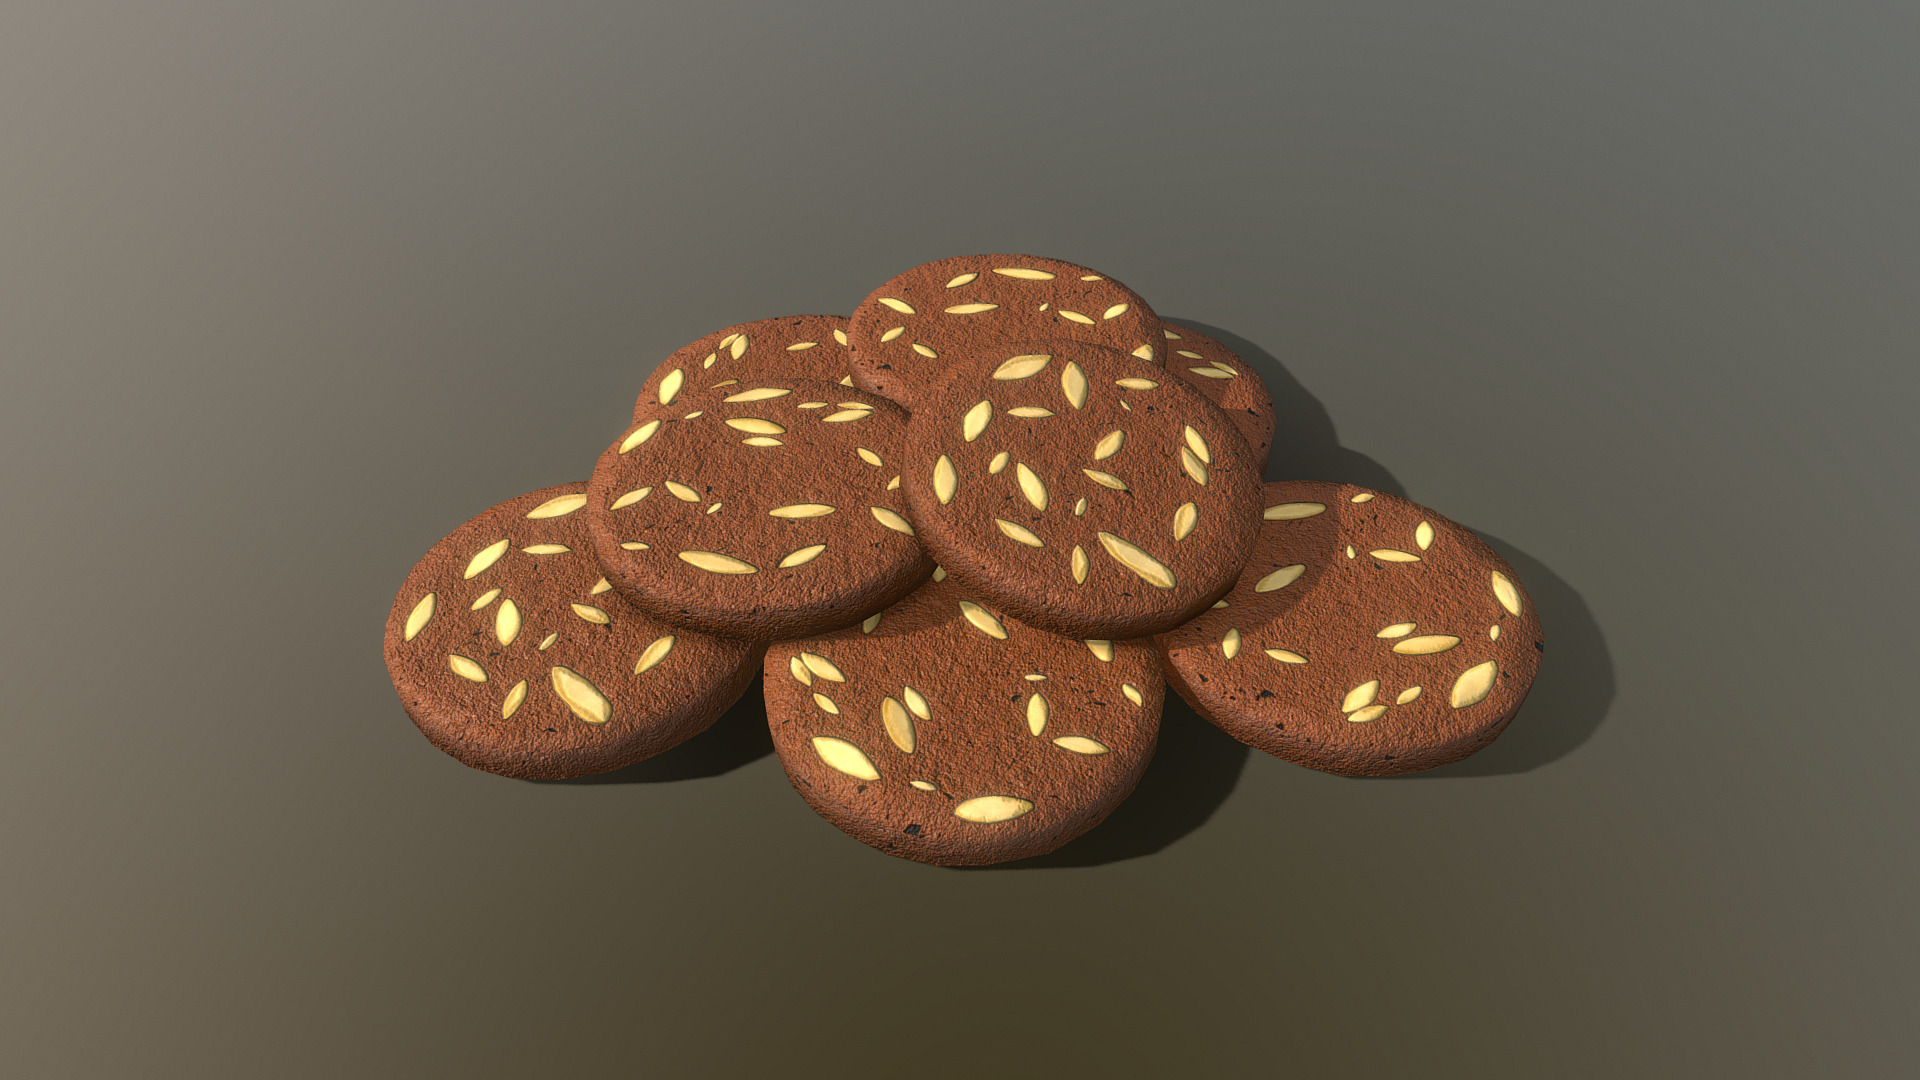 3D model HIE Cookie N3 - This is a 3D model of the HIE Cookie N3. The 3D model is about a group of chocolate chip cookies.